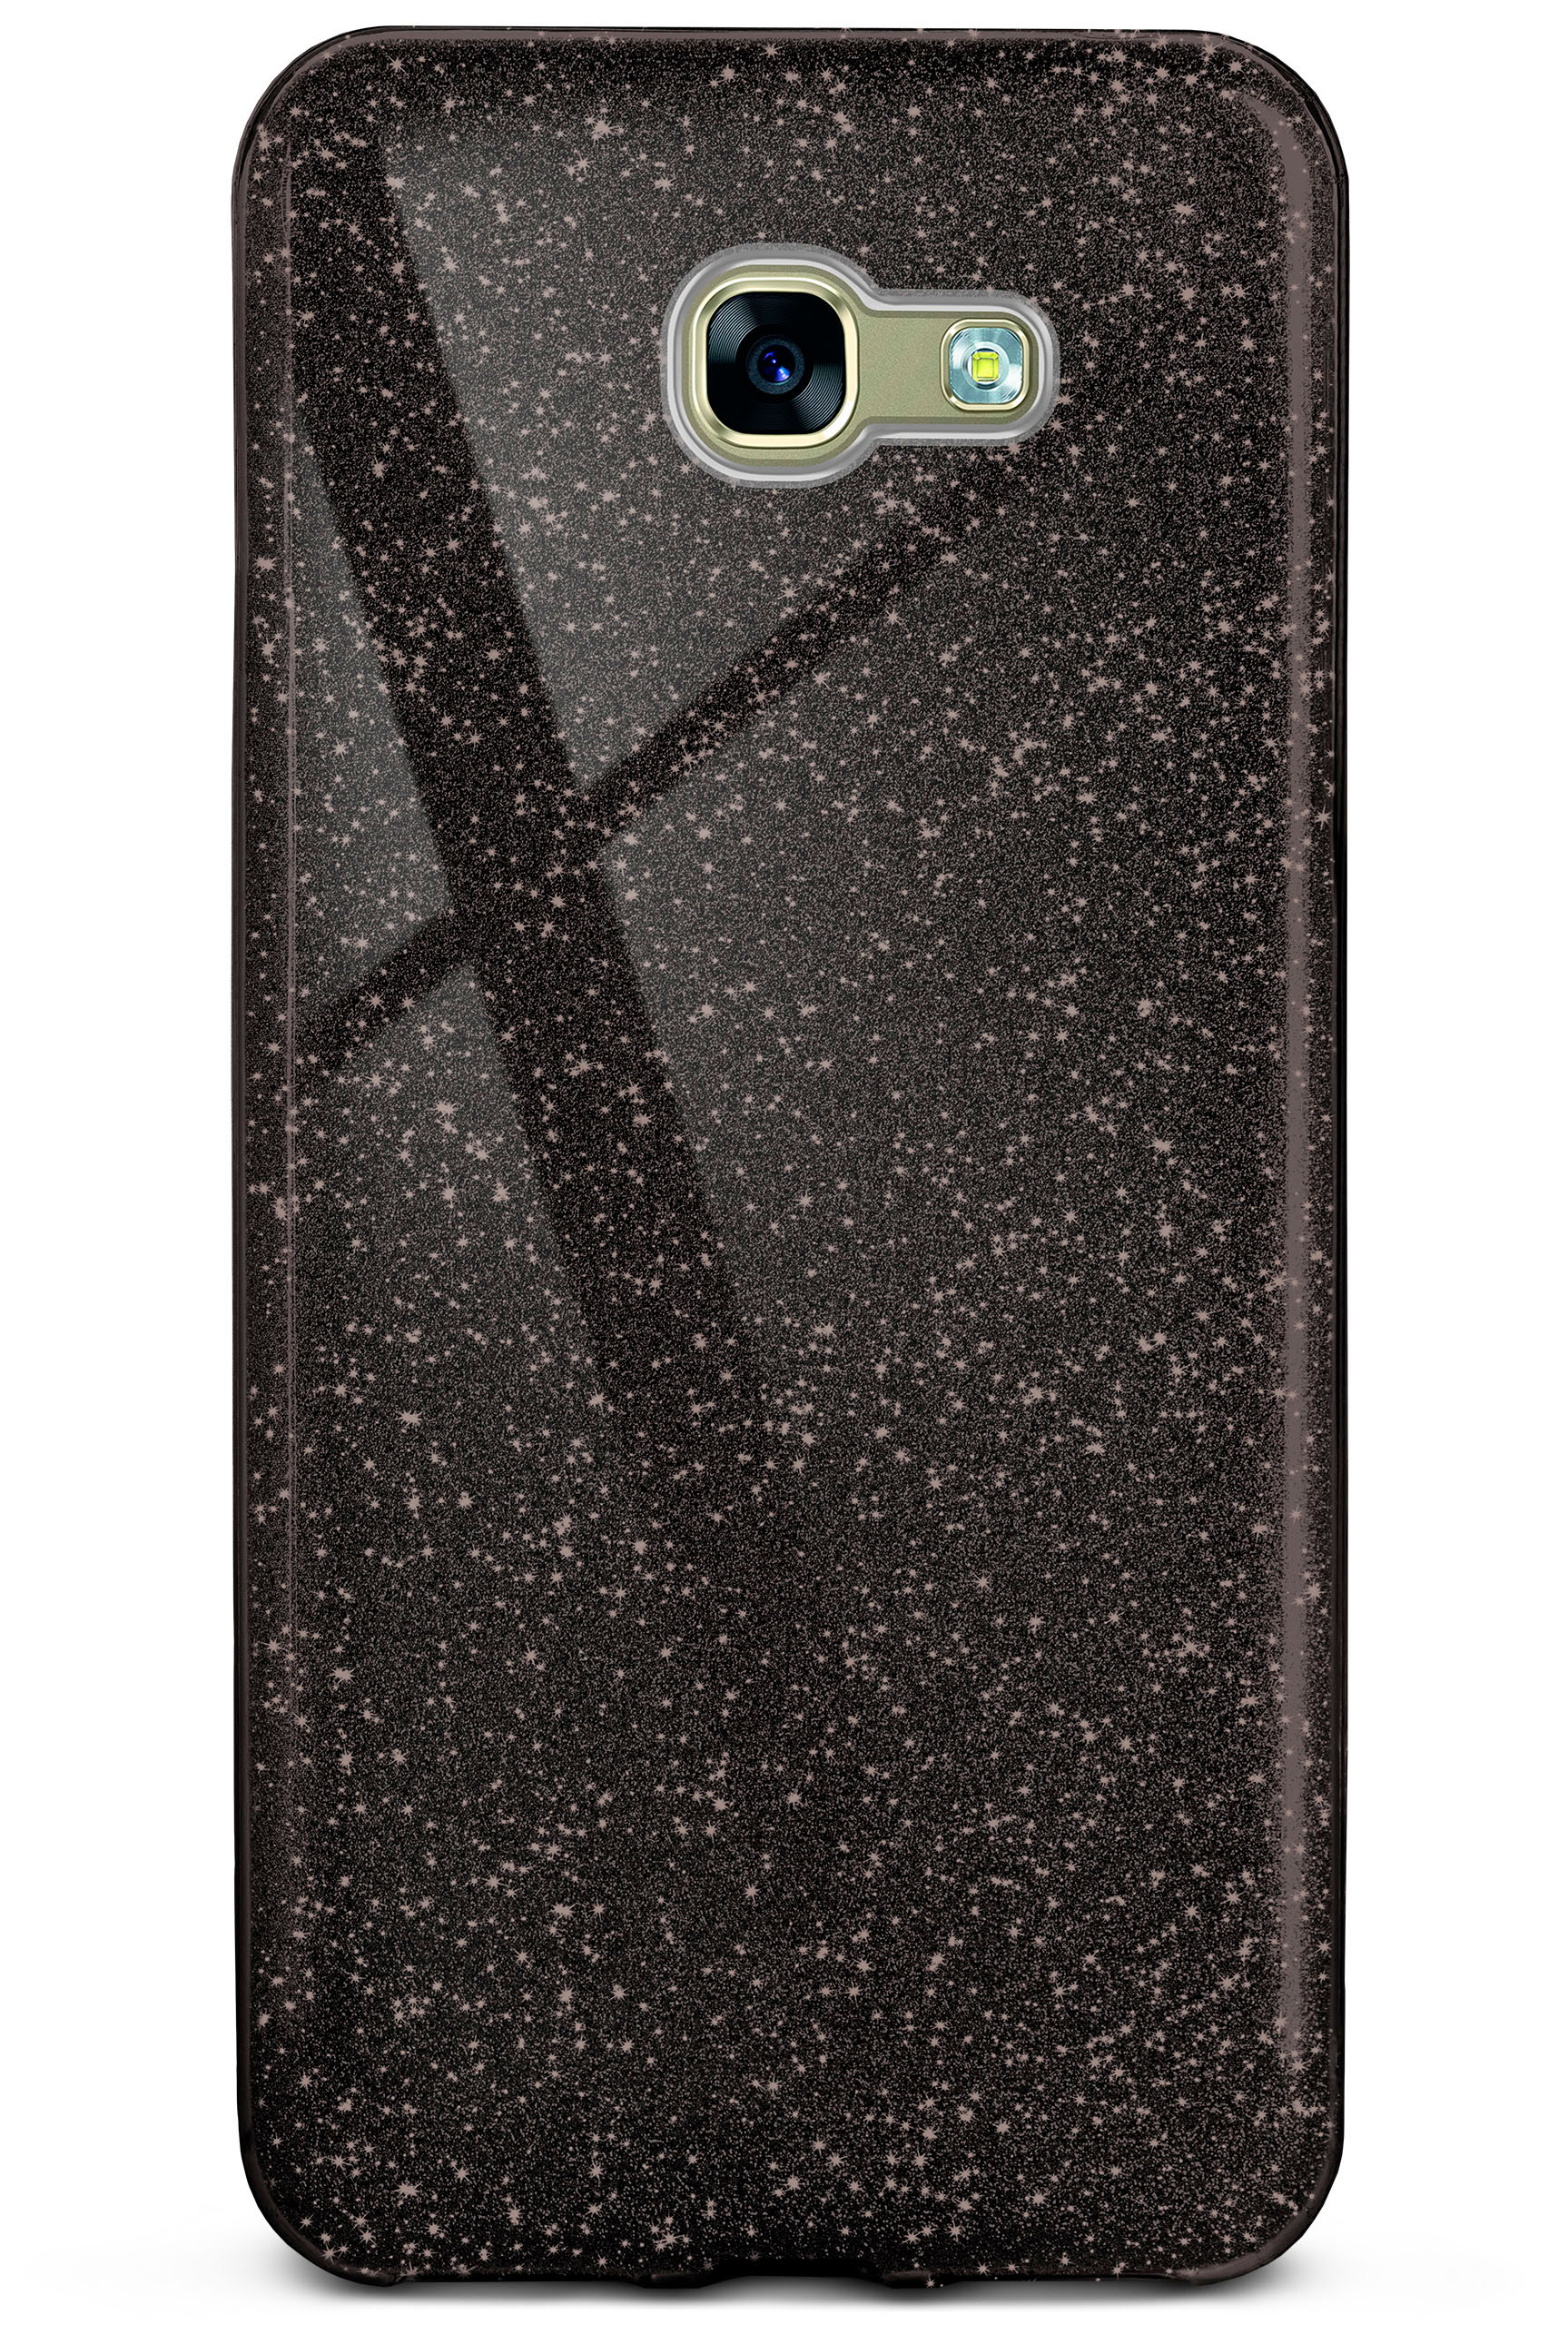 ONEFLOW Case, (2017), A3 Galaxy Glitter Samsung, Black Backcover, Glamour -